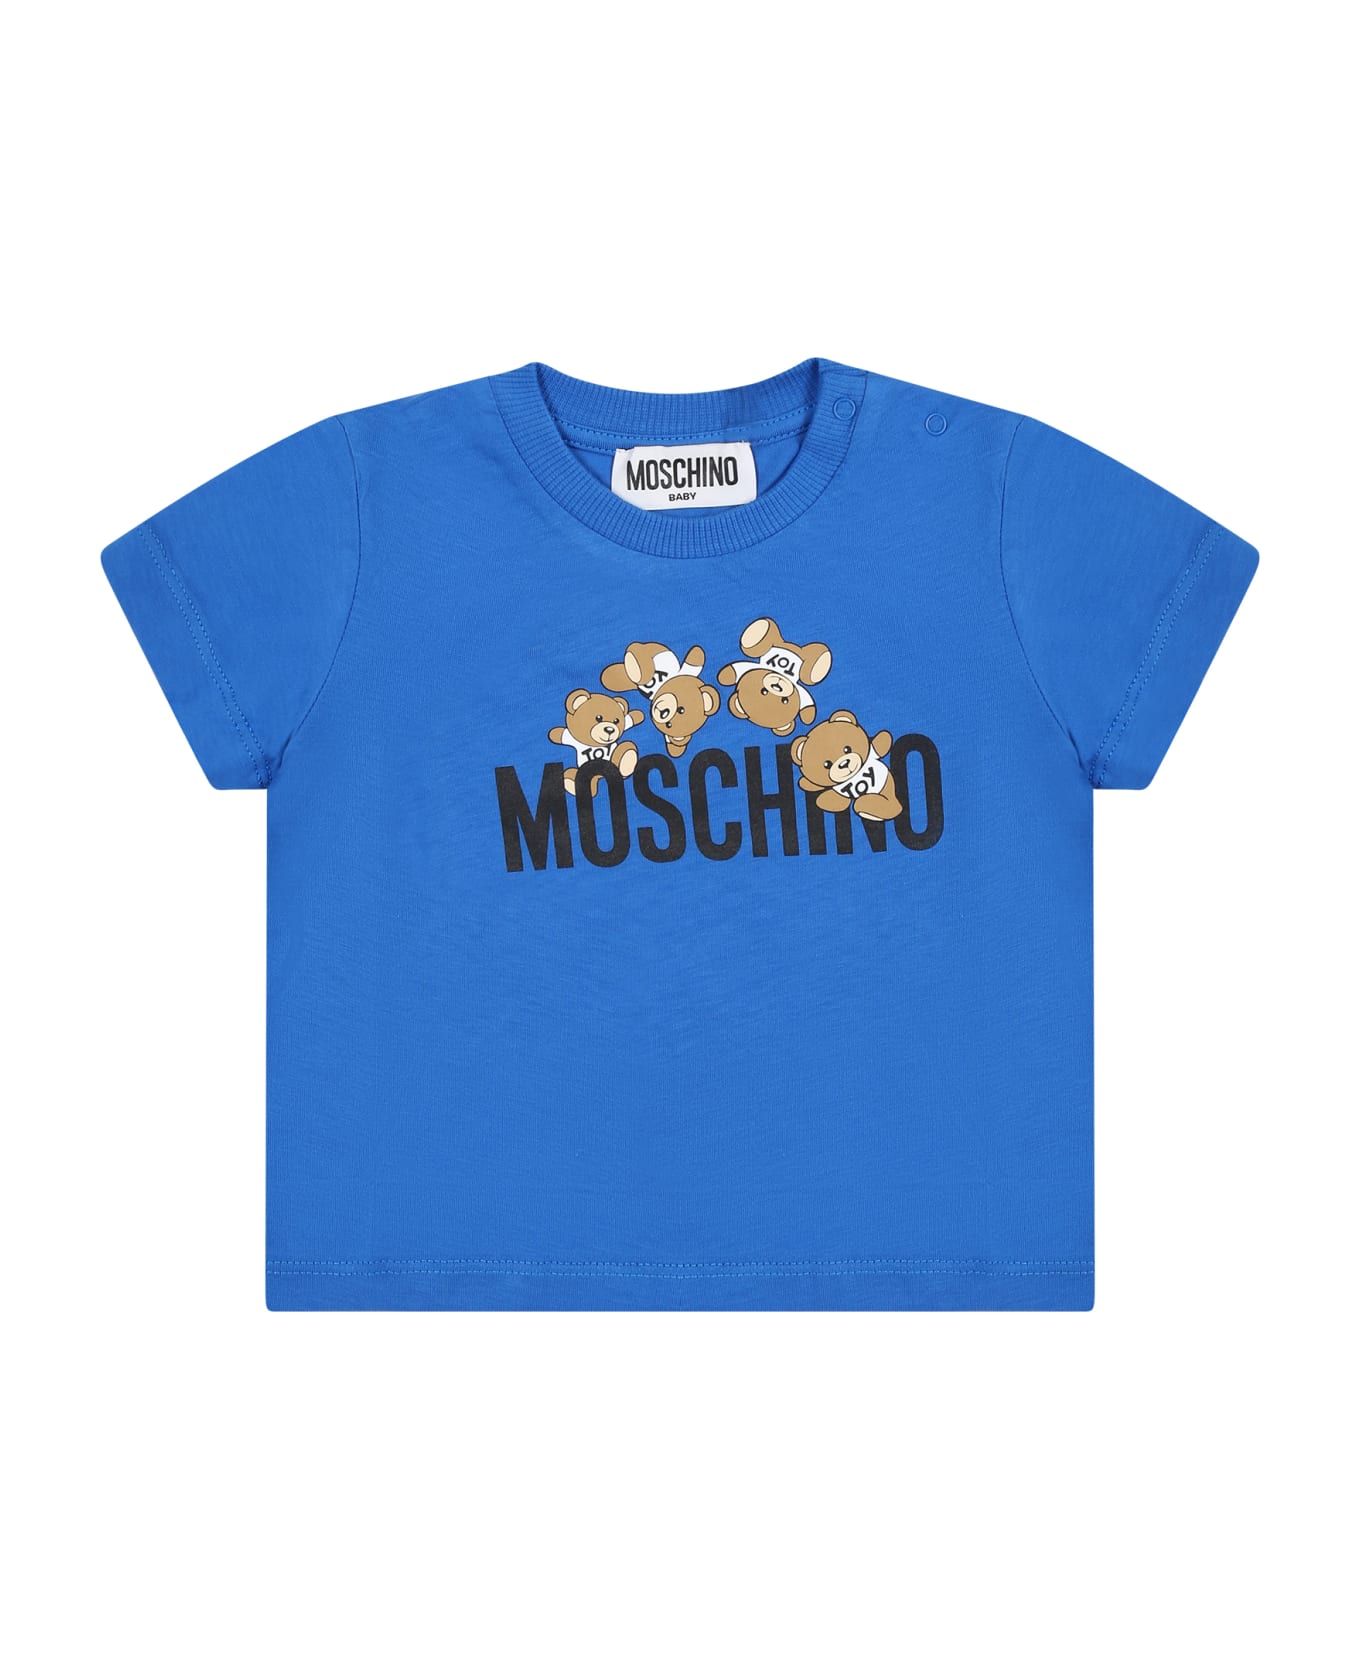 Moschino Blue T-shirt For Baby Boy With Teddy Bears And Logo - Blue